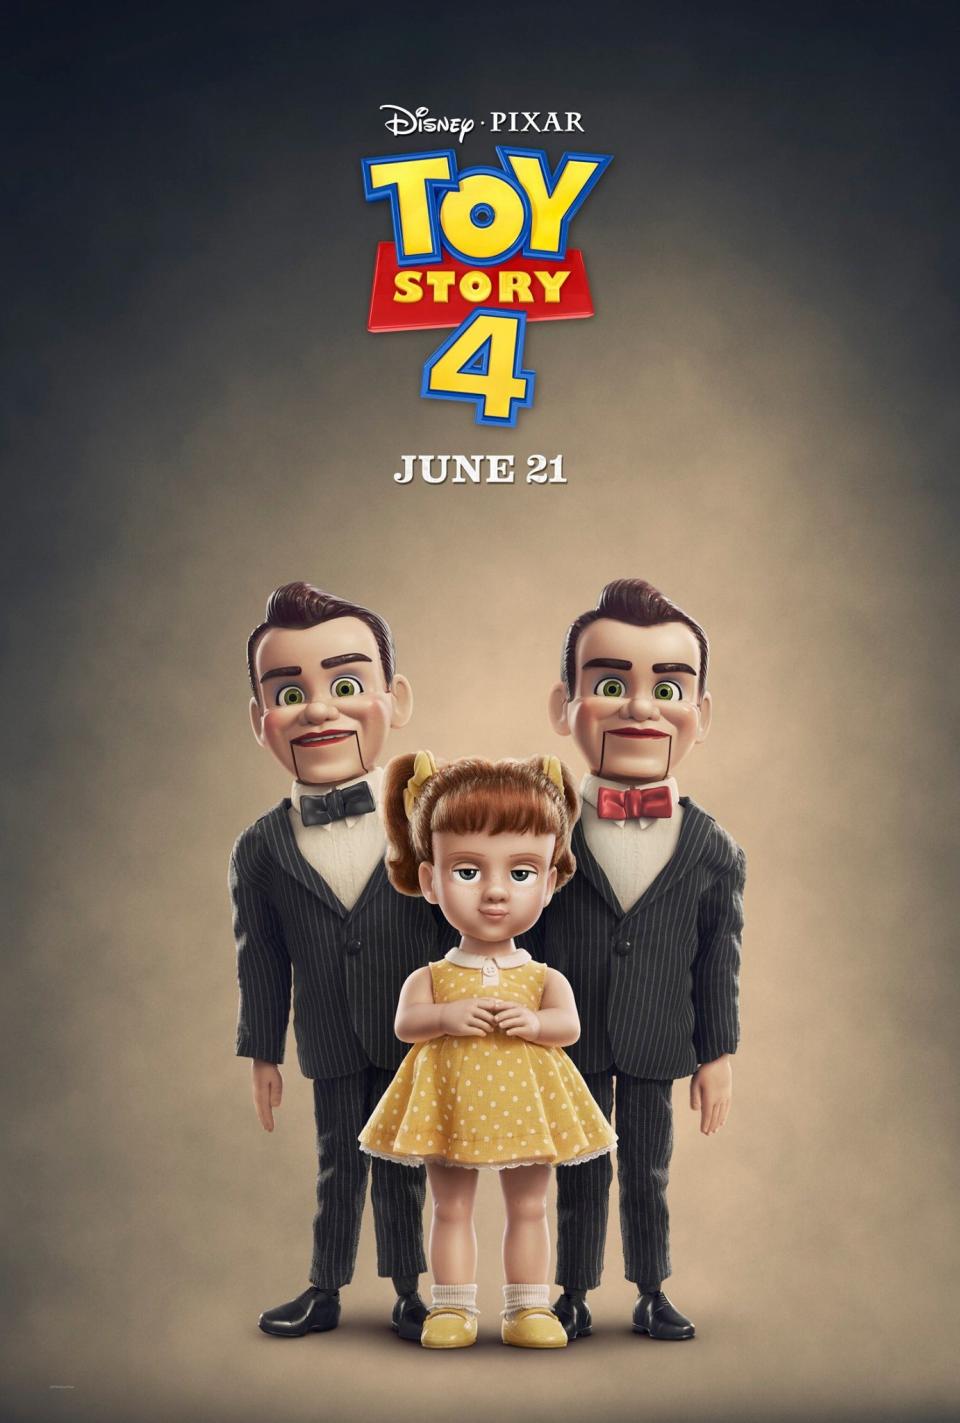 Promotional poster for Toy Story 4 featuring Gabby Gabby and Benson, premiering June 21